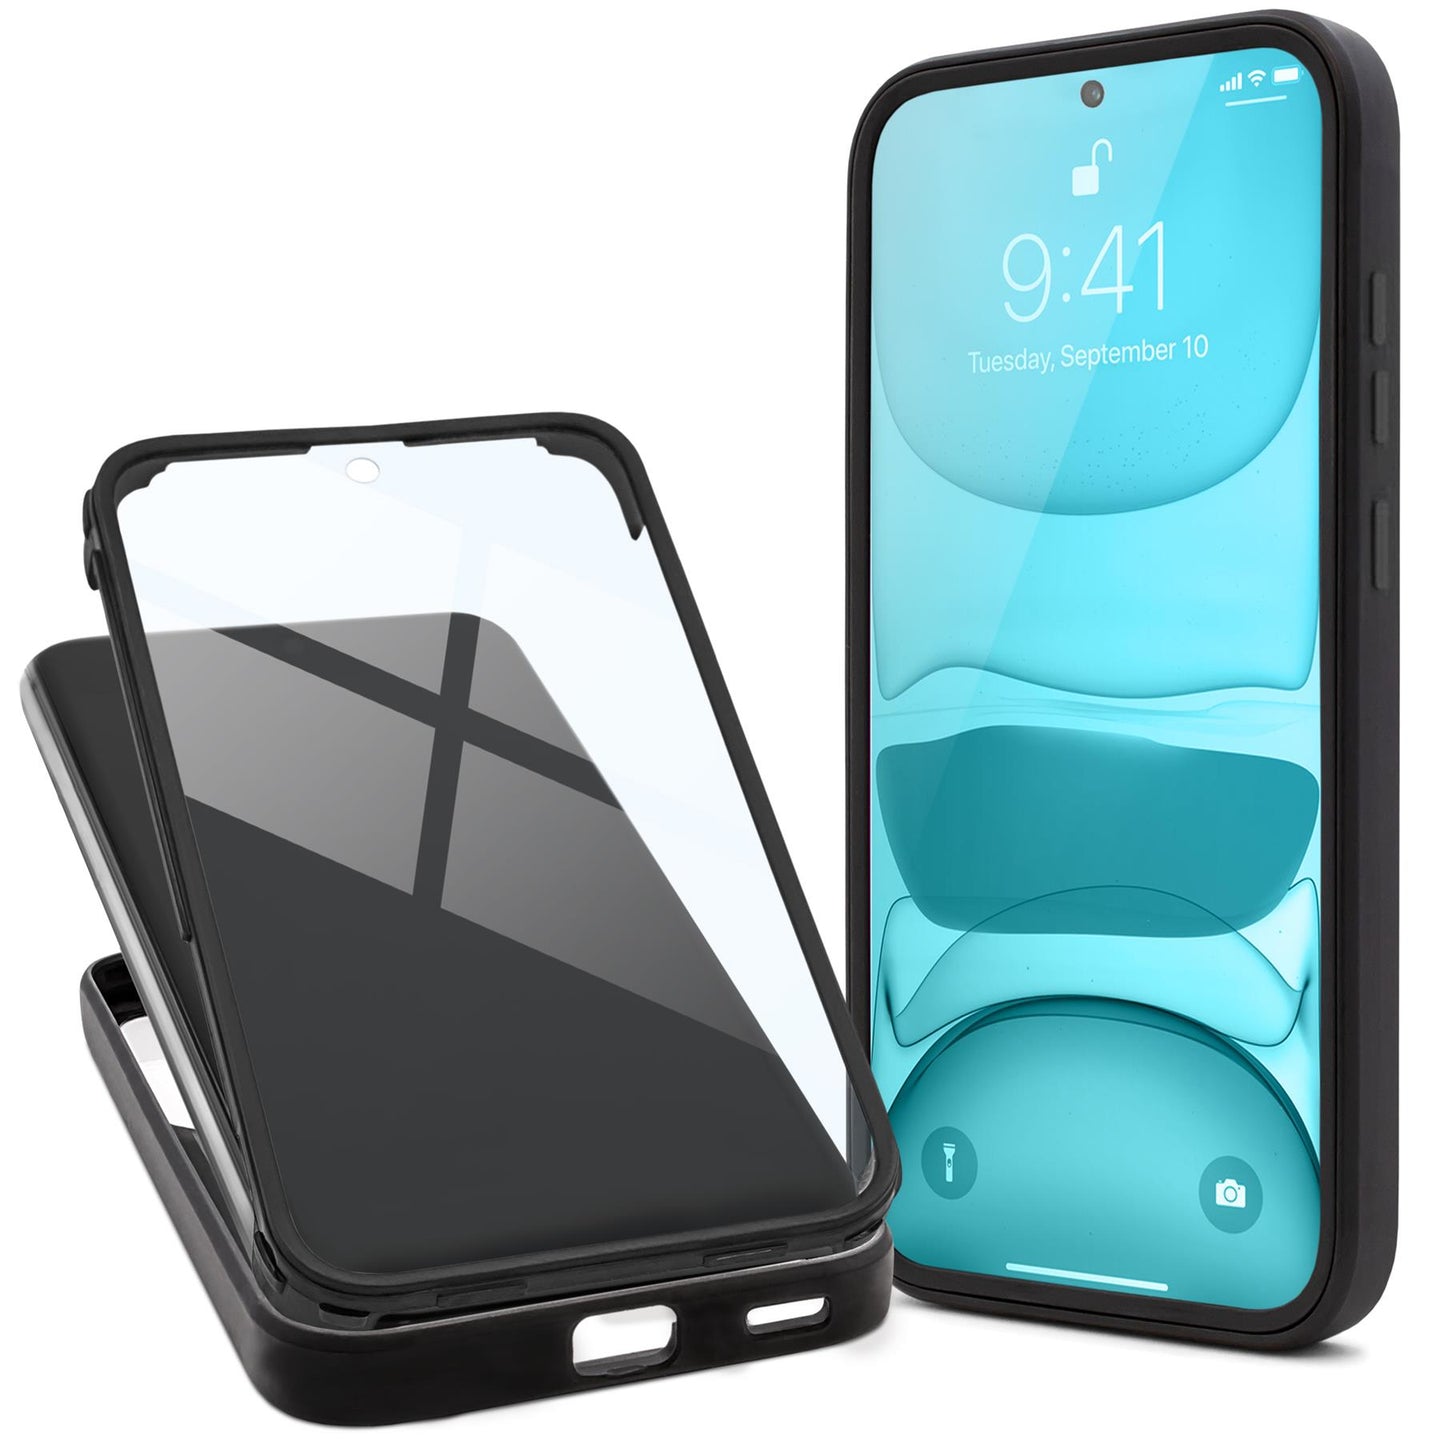 Moozy 360 Case for Samsung S21 5G and 4G - Black Rim Transparent Case, Full Body Double-sided Protection, Cover with Built-in Screen Protector